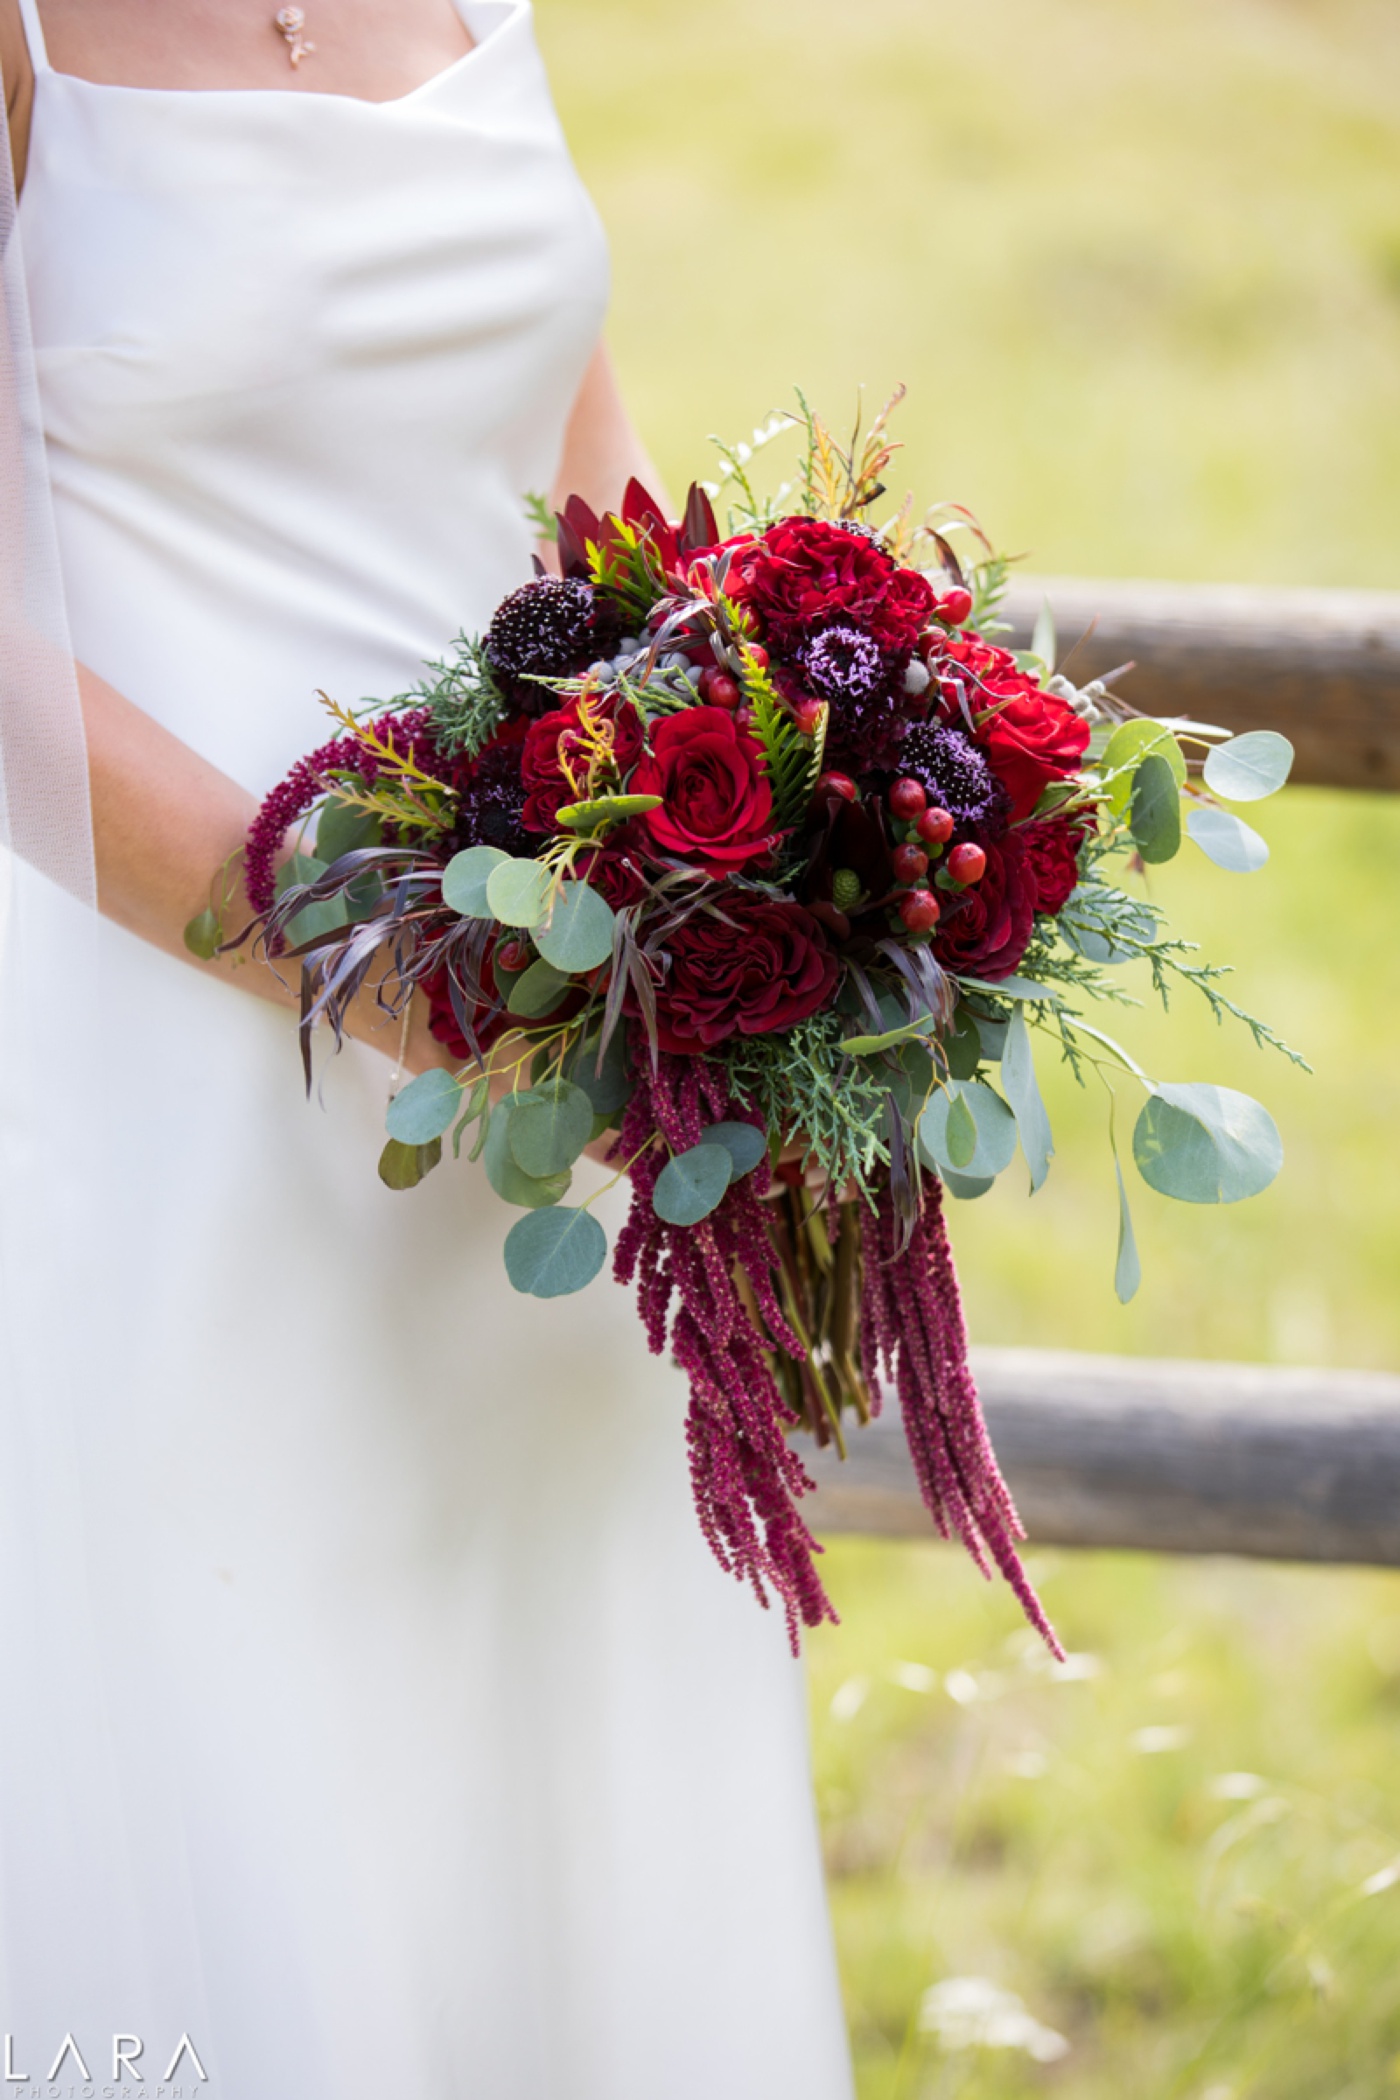 Bridal bouquet with red roses, plum flowers, and eucalyptus